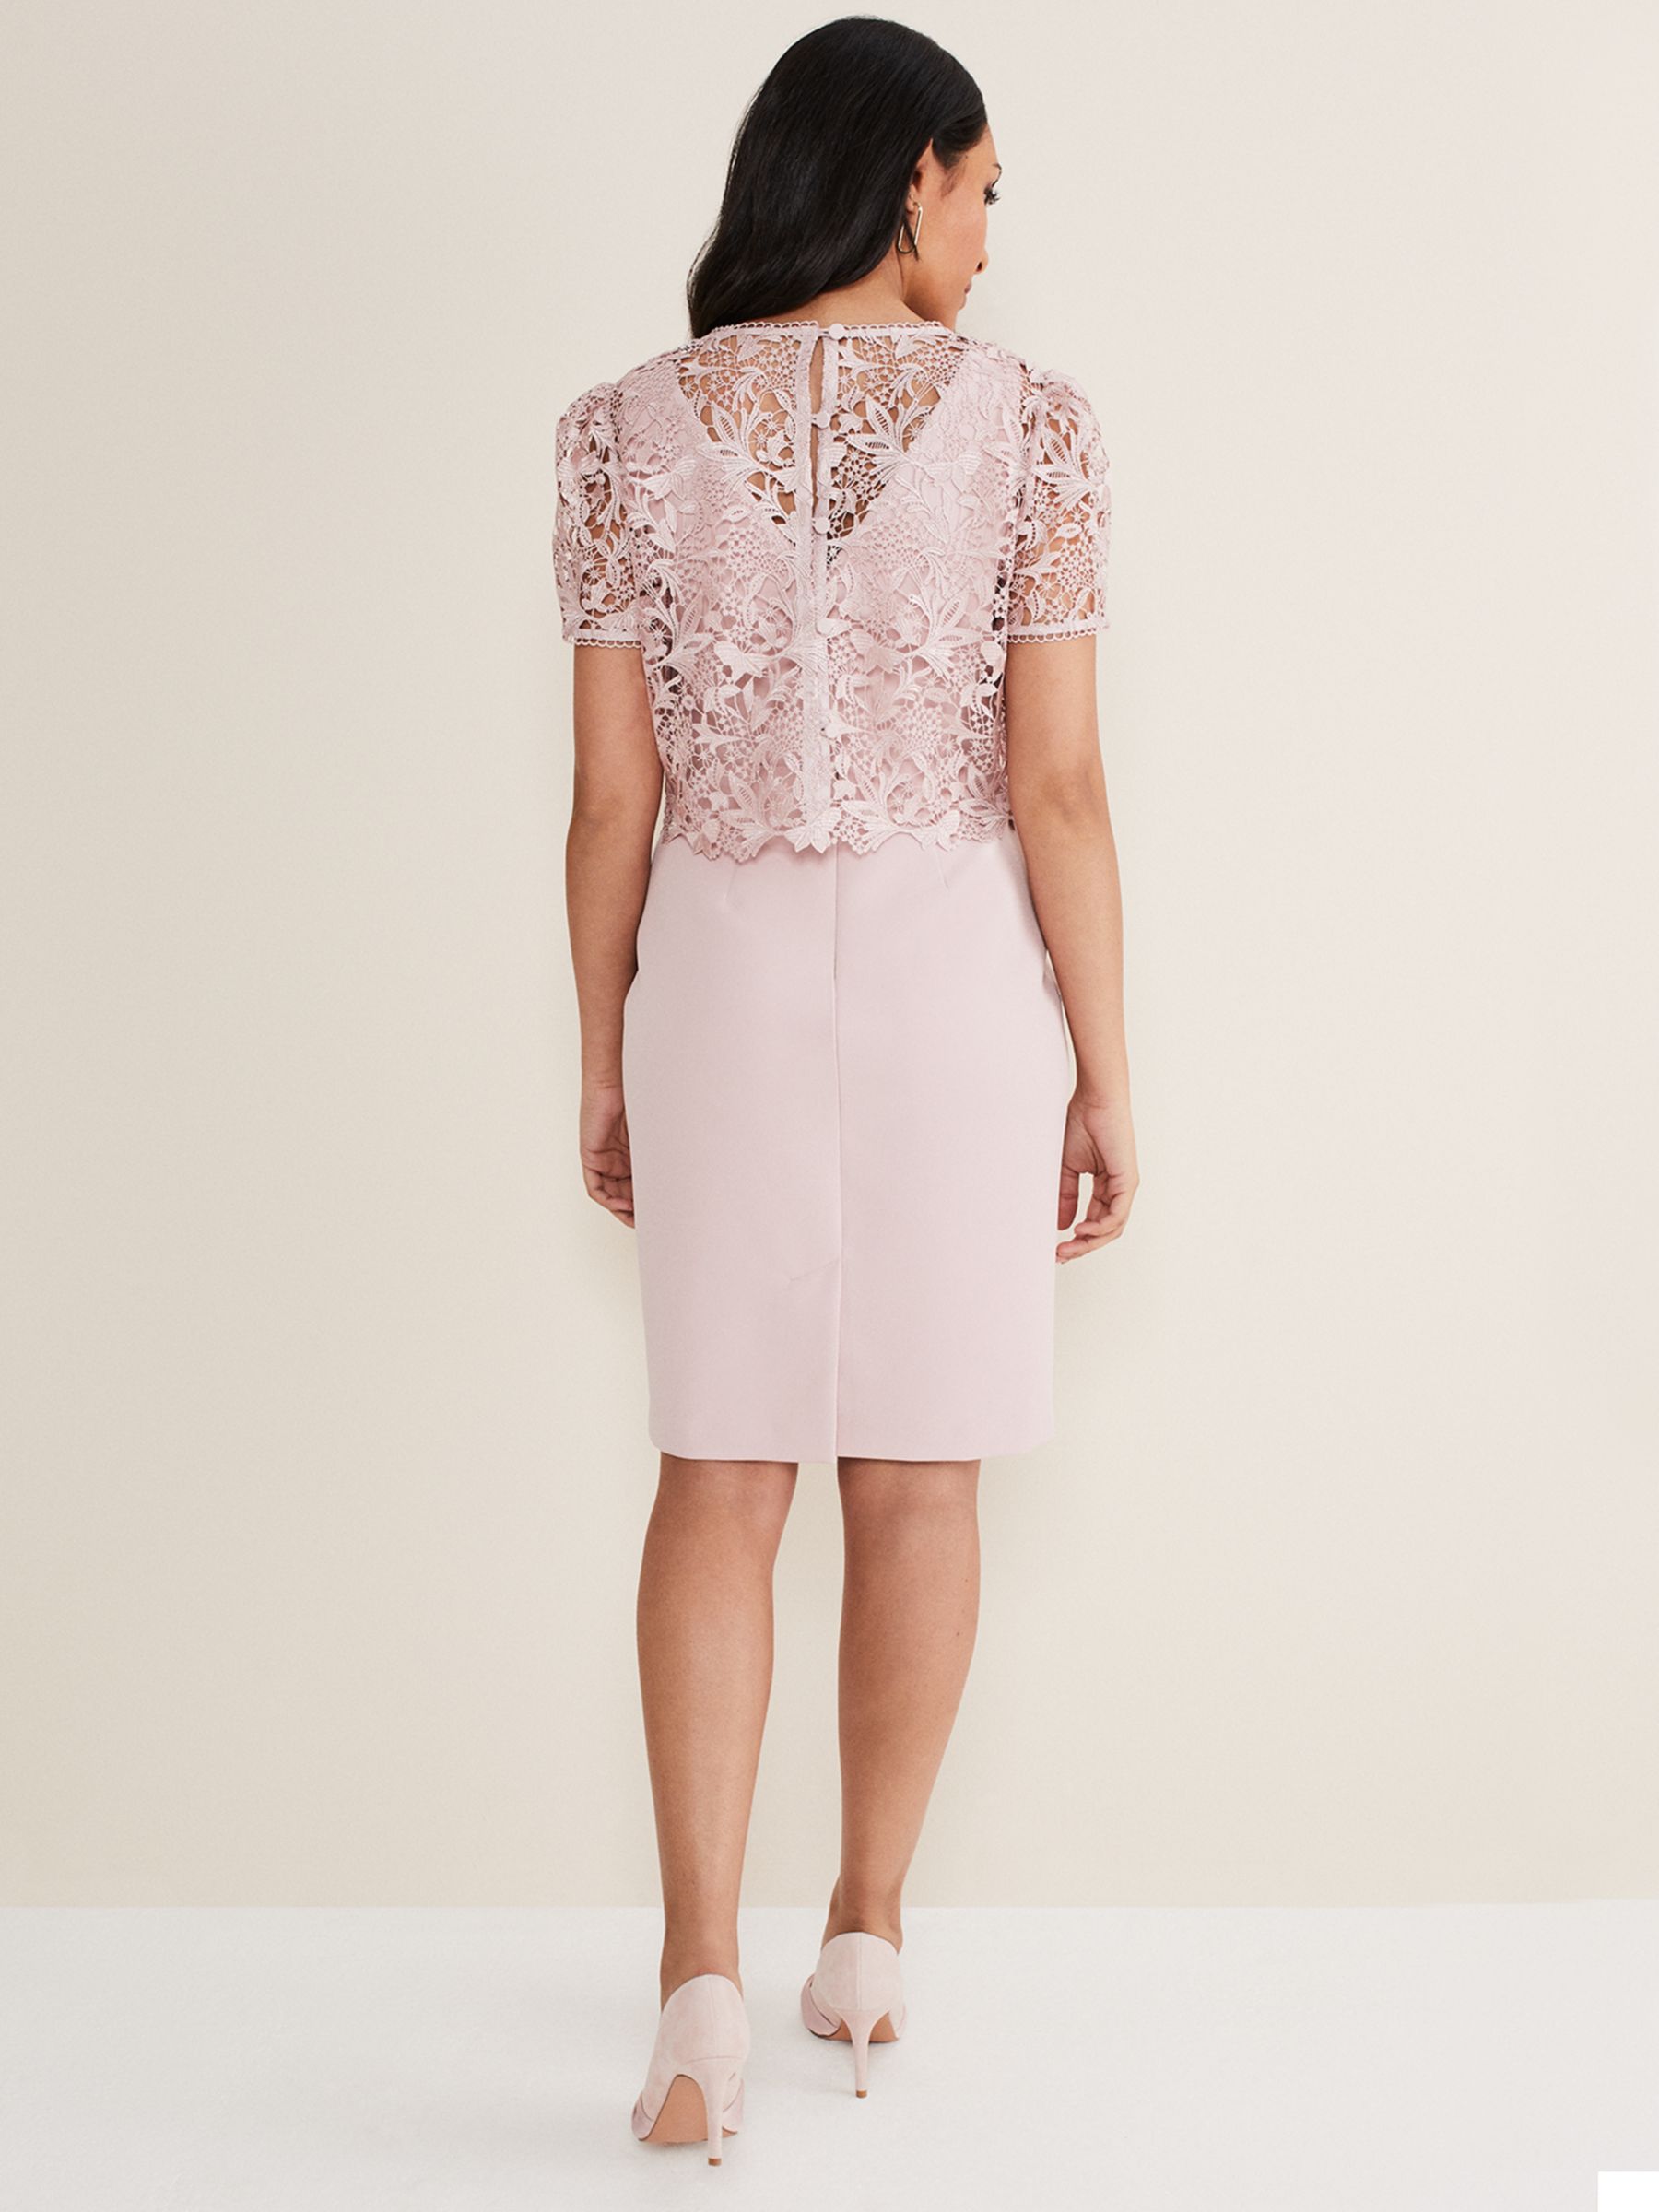 Buy Phase Eight Petite Isabella Lace Dress Online at johnlewis.com